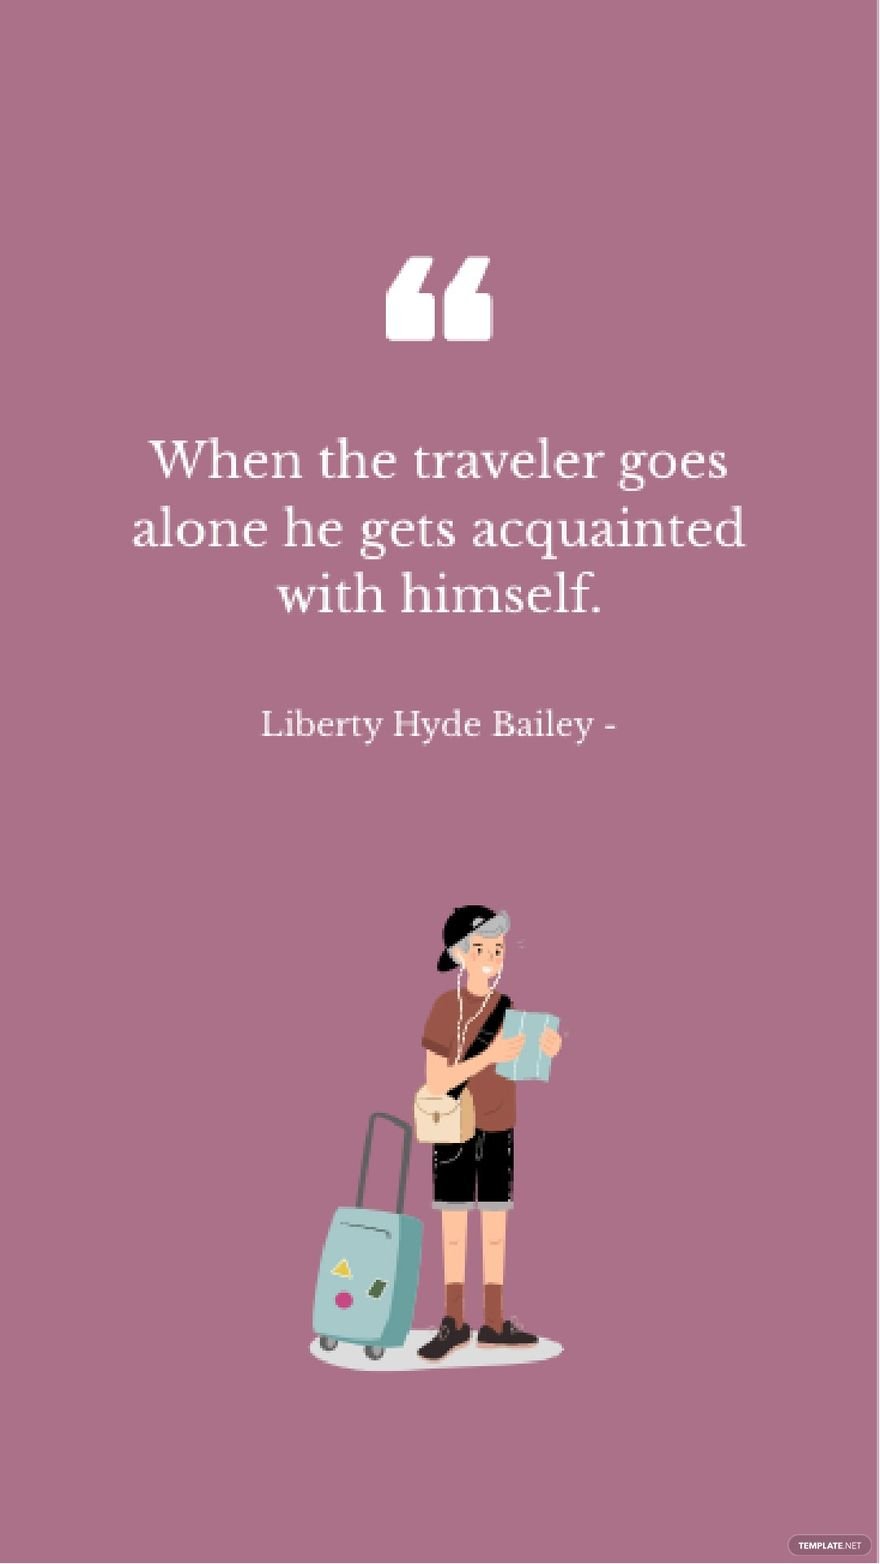 Free Liberty Hyde Bailey - When the traveler goes alone he gets acquainted with himself. in JPG